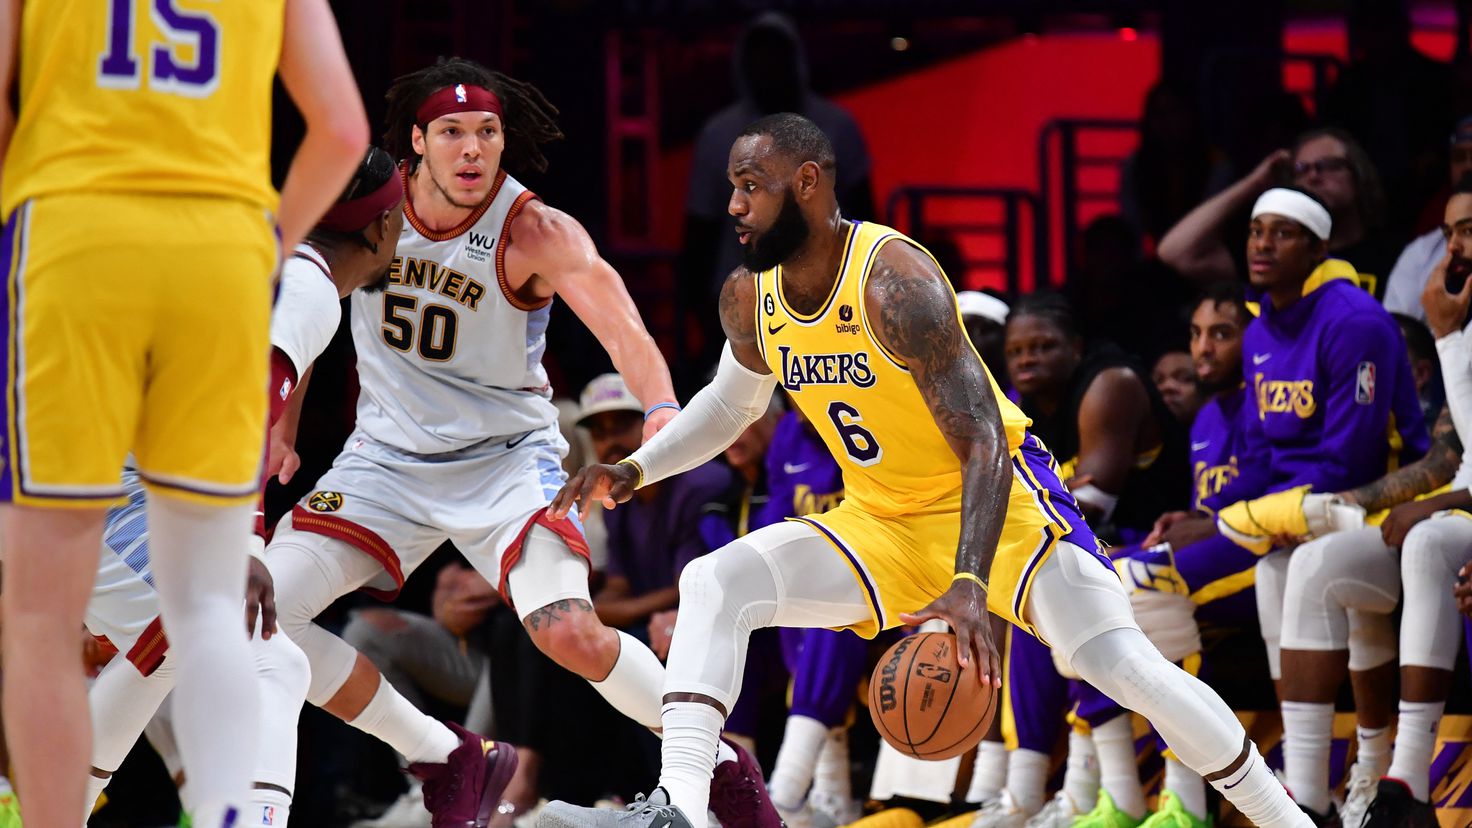 LeBron James exceeded 8 thousand points in the 'playoffs', but did not prevent the elimination of the Lakers
